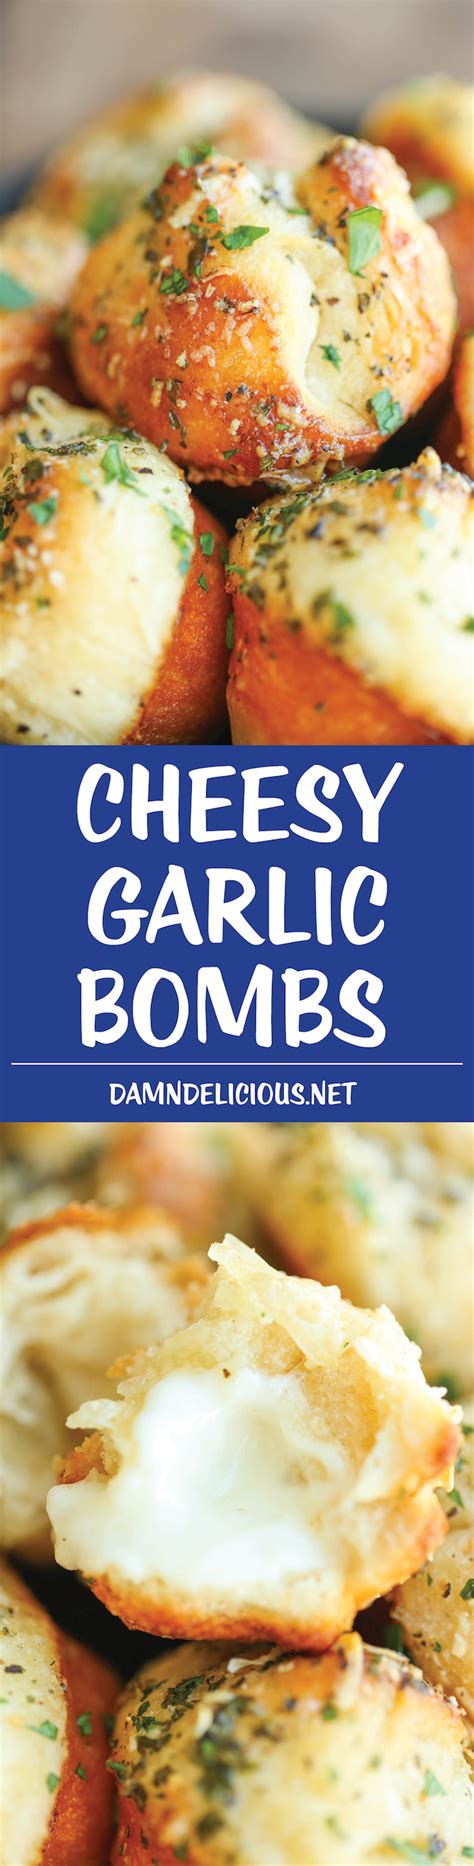 These cheesy garlic crescent roll bombs were amazing! Cheesy Garlic Bombs - Damn Delicious